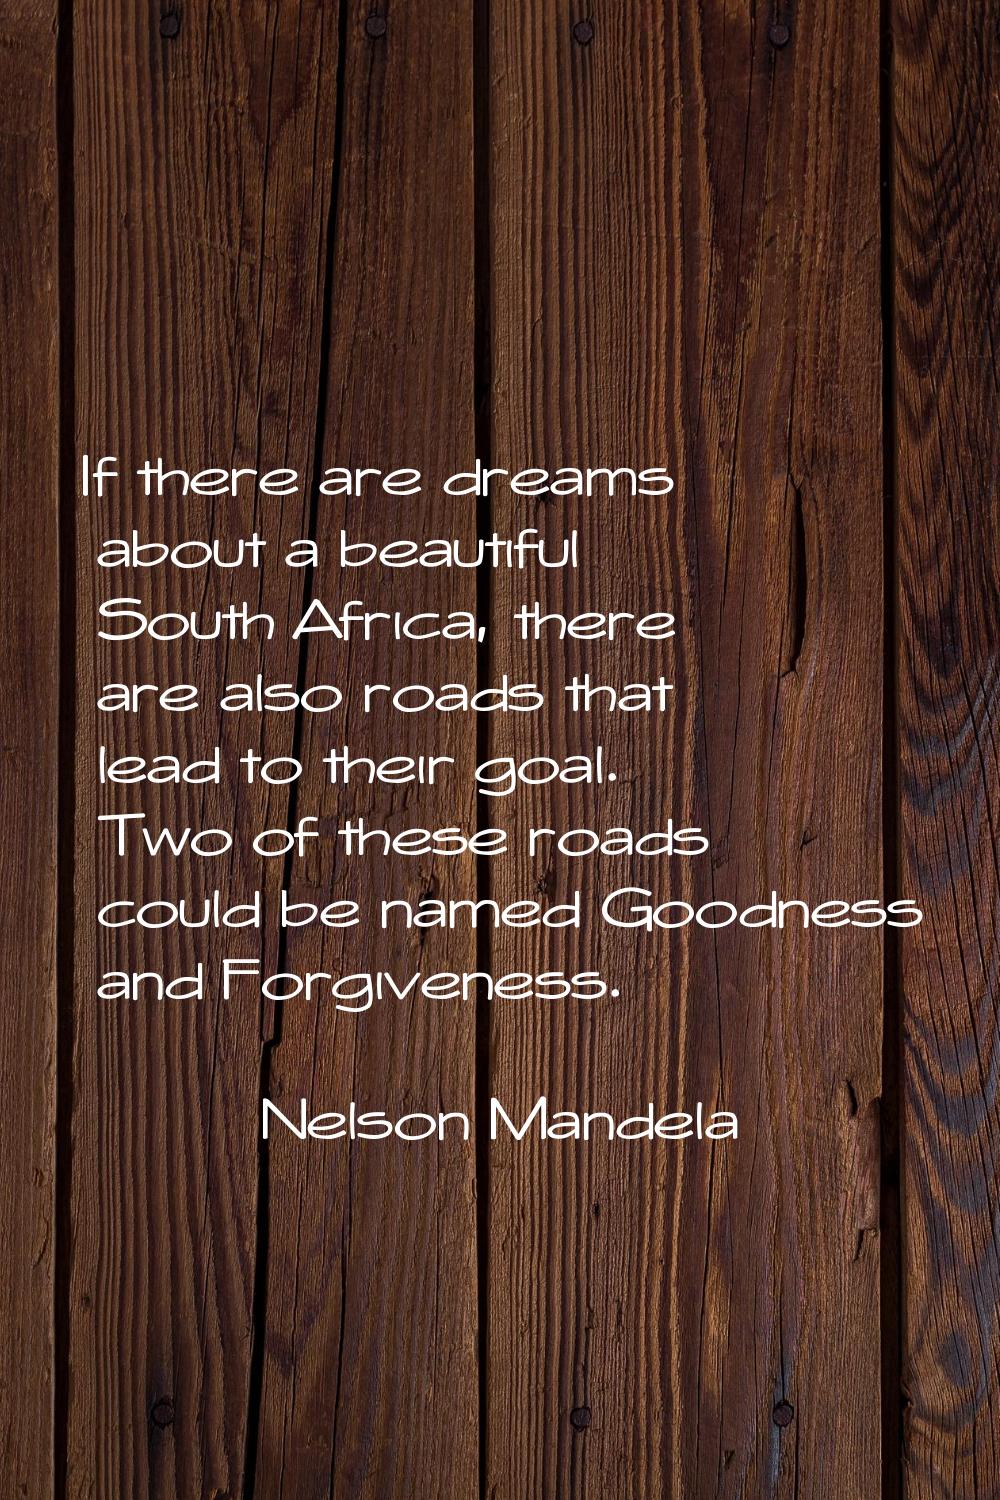 If there are dreams about a beautiful South Africa, there are also roads that lead to their goal. T